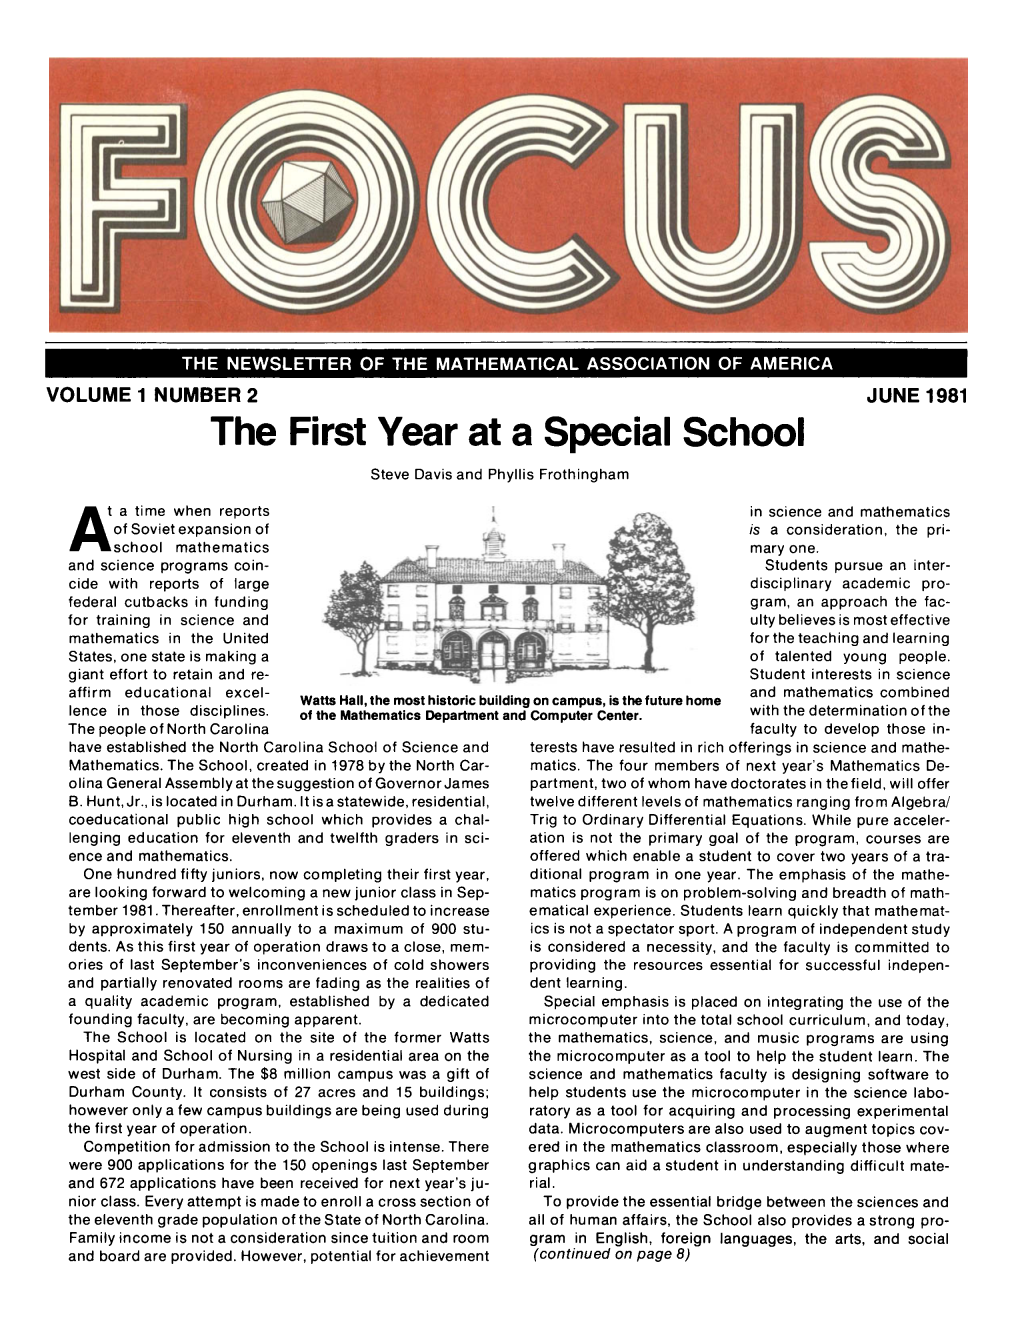 The First Year at a Special School Steve Davis and Phyllis Frothingham